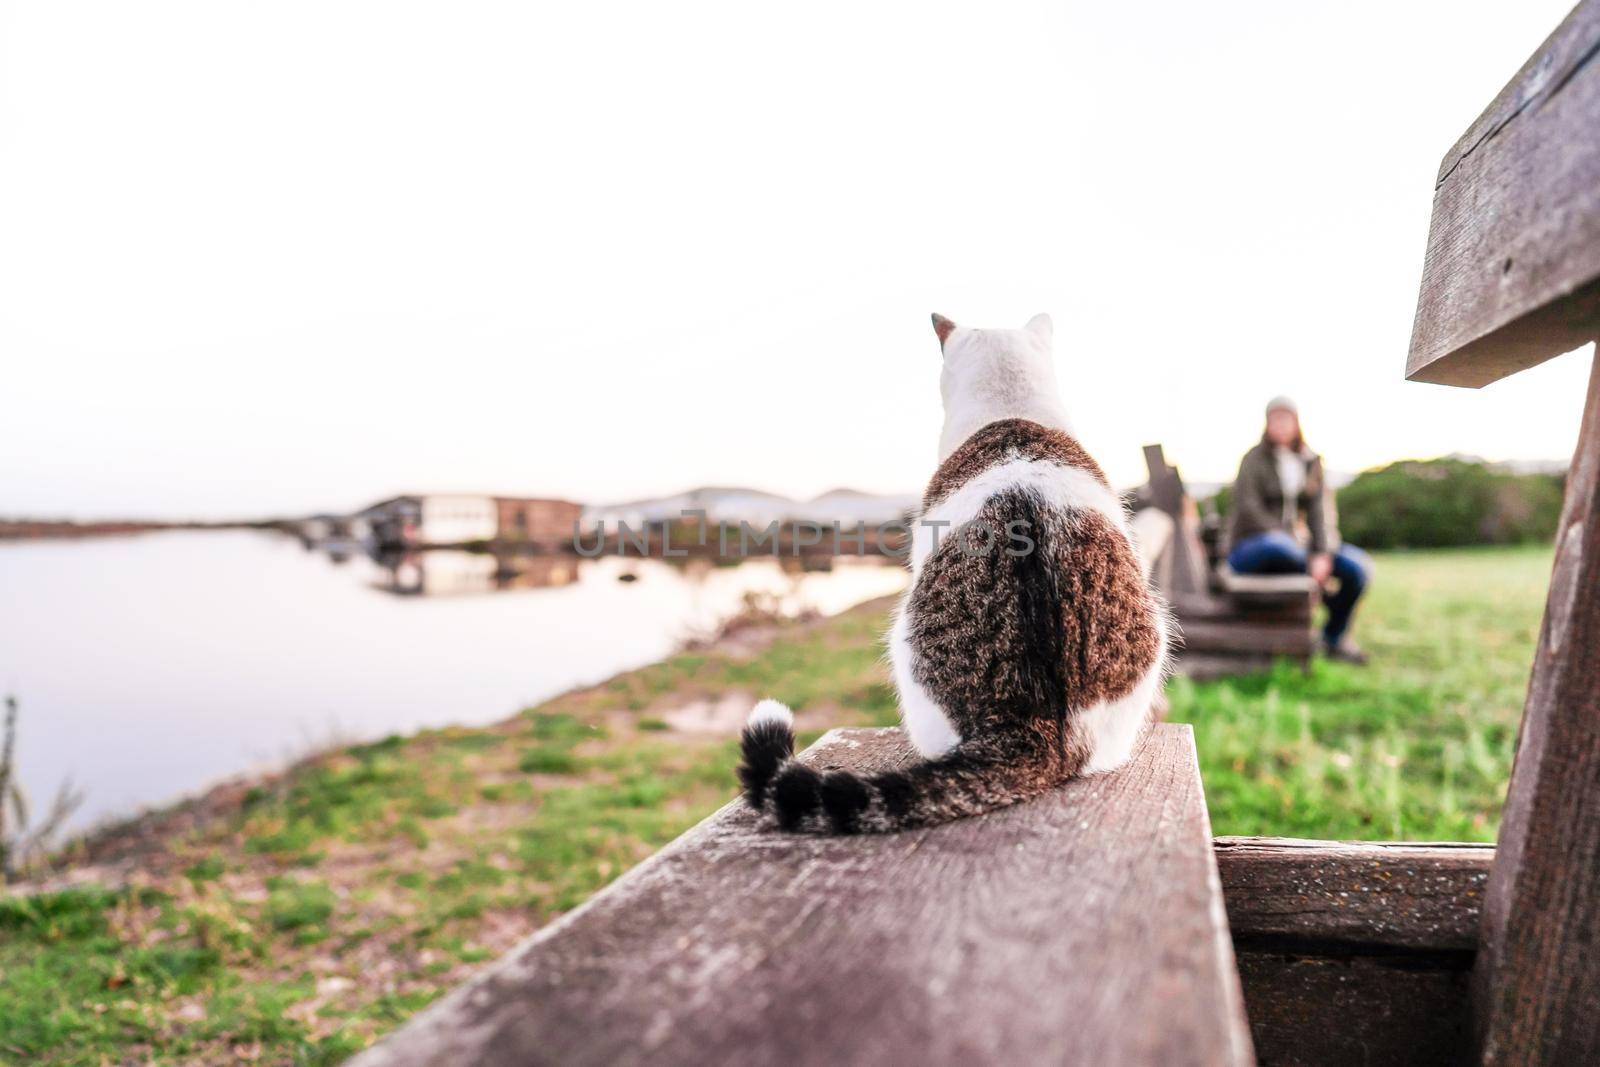 Close-up of a cat from behind sitting on a bench by a lake facing a blurred woman sitting in the background looking at him - Concept of cats as animals independent of humans - Selective focus on cat